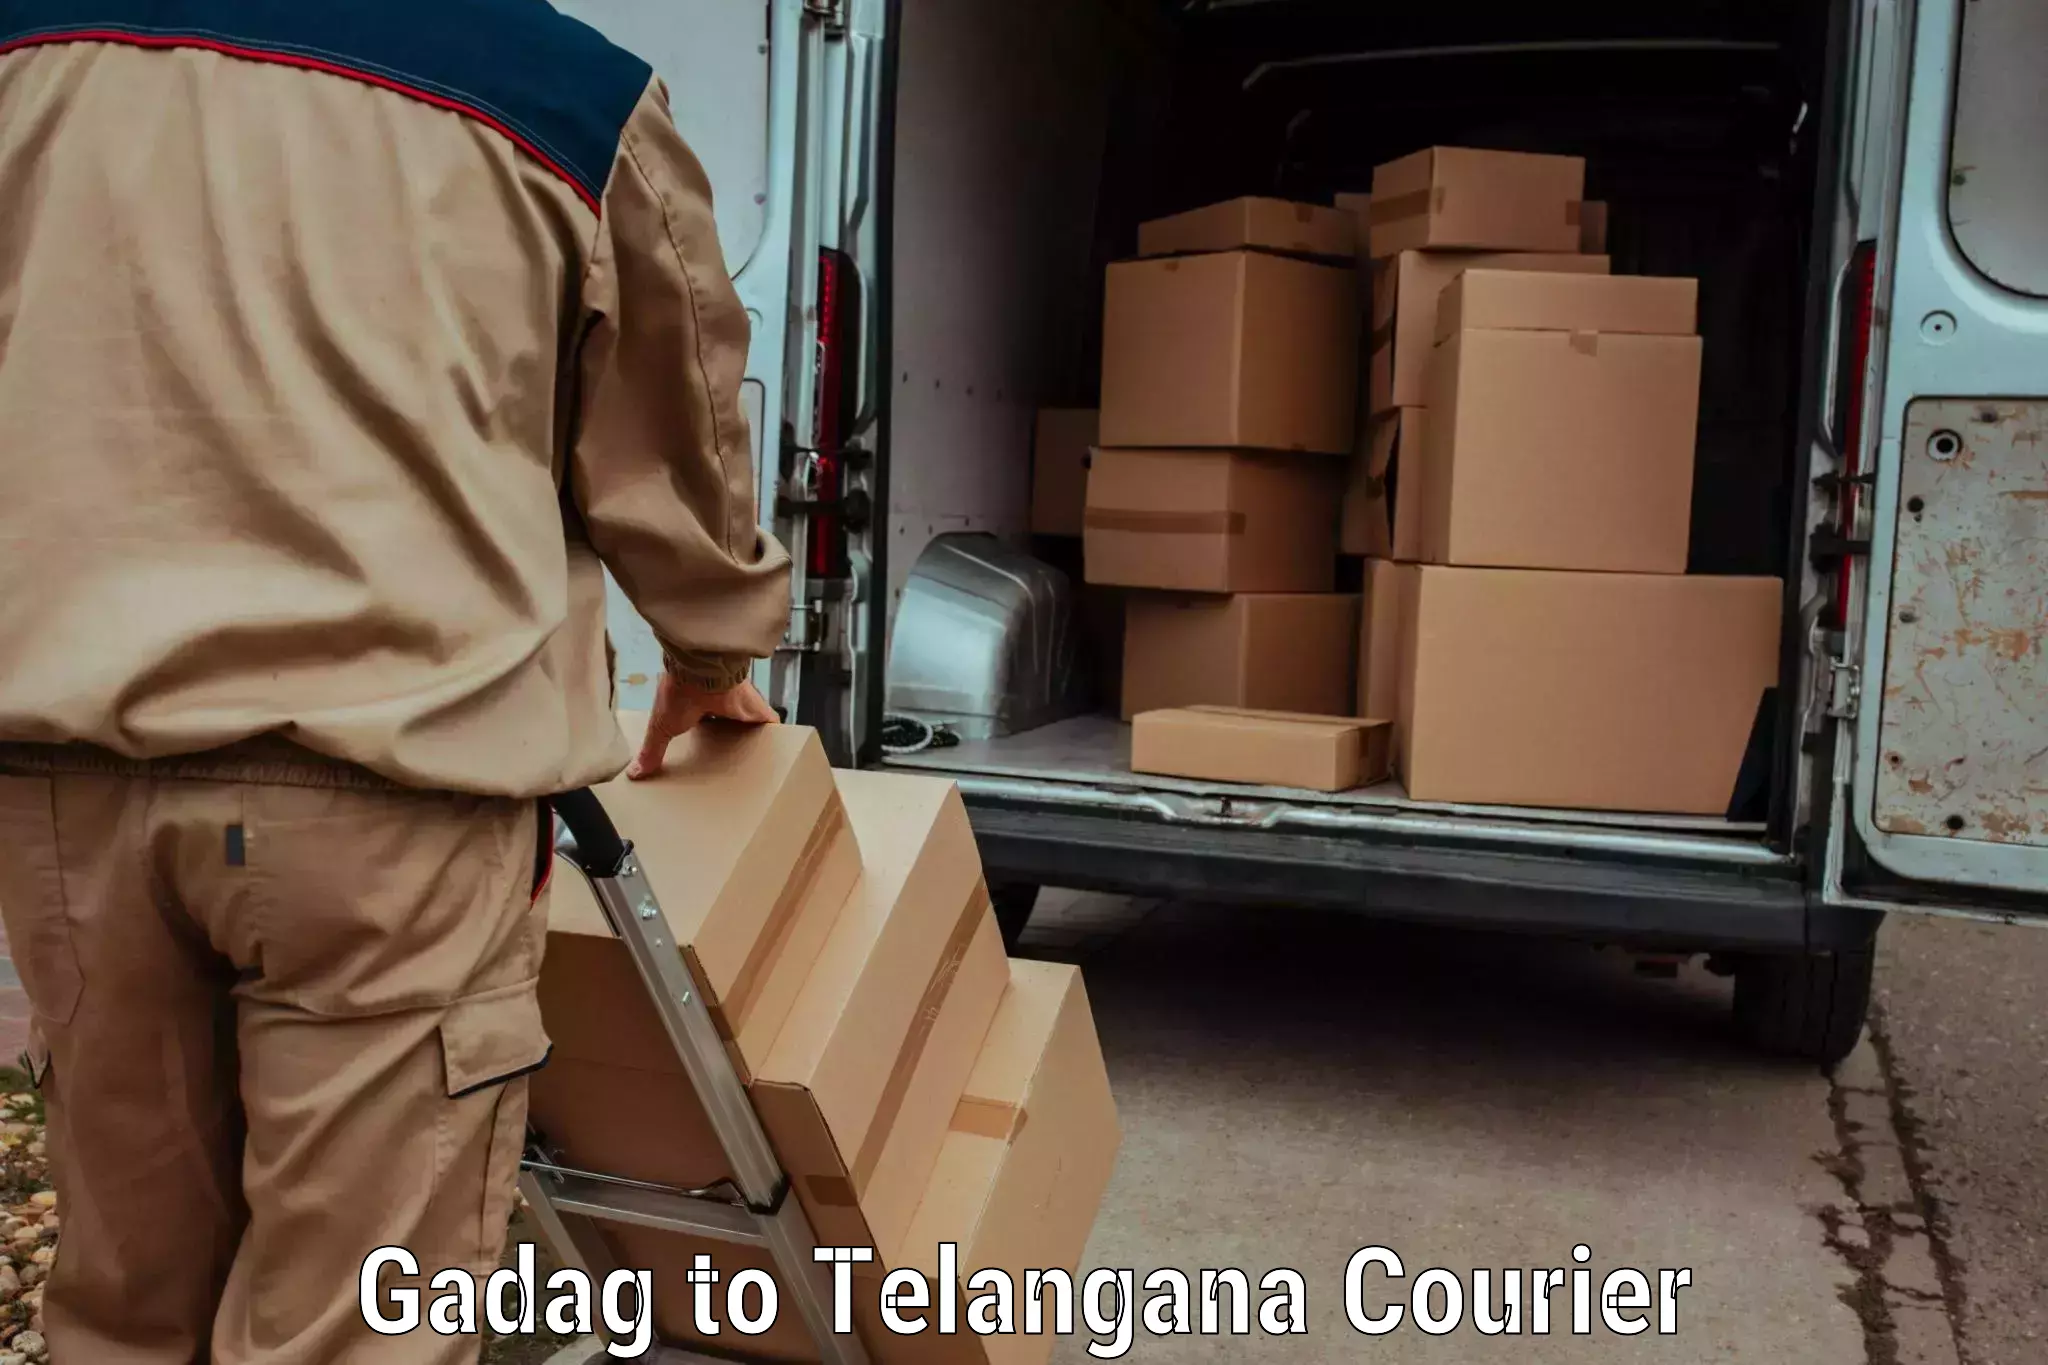 Multi-national courier services Gadag to Nakerakal